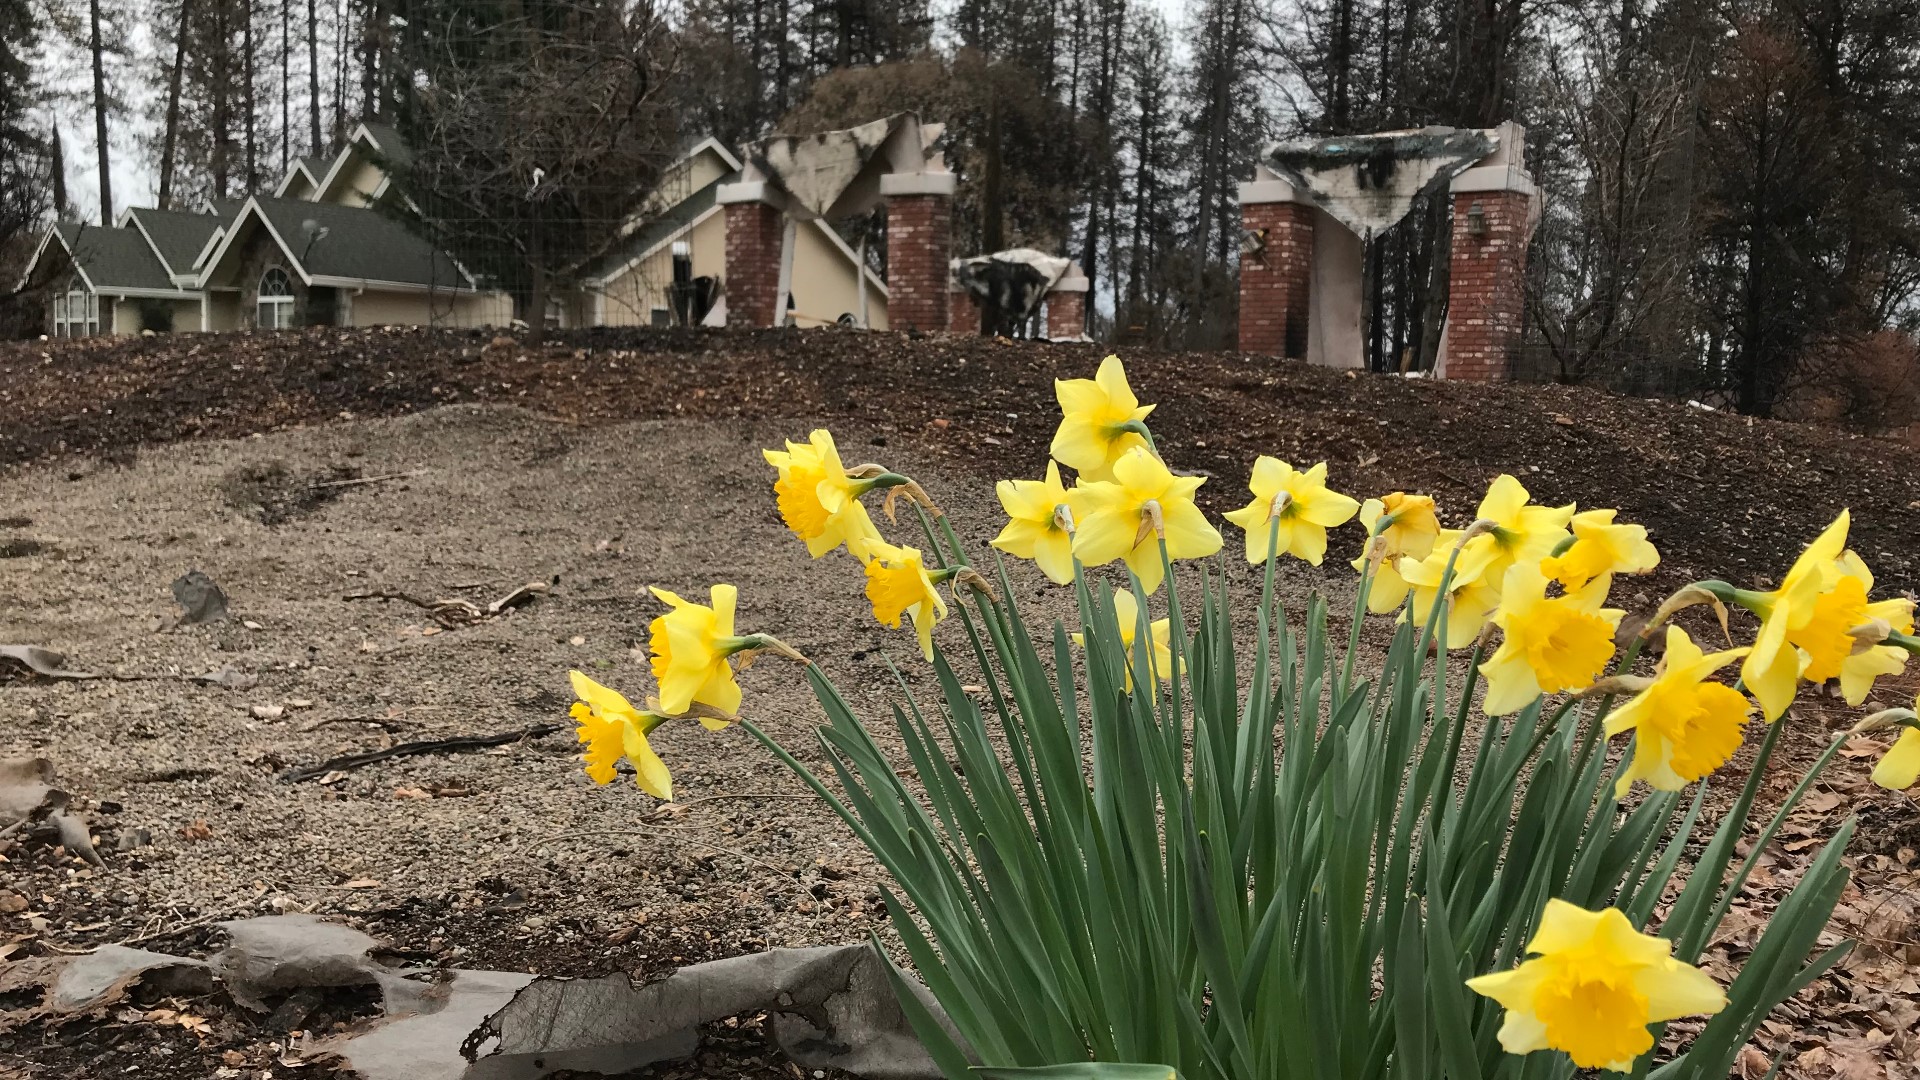 The evidence of the fickleness of the Camp Fire is obvious. The fire snatched houses here and there, sometimes between two other houses that remained standing, seemingly untouched. Still, flowers are blooming, even within the scars of once proud homes.